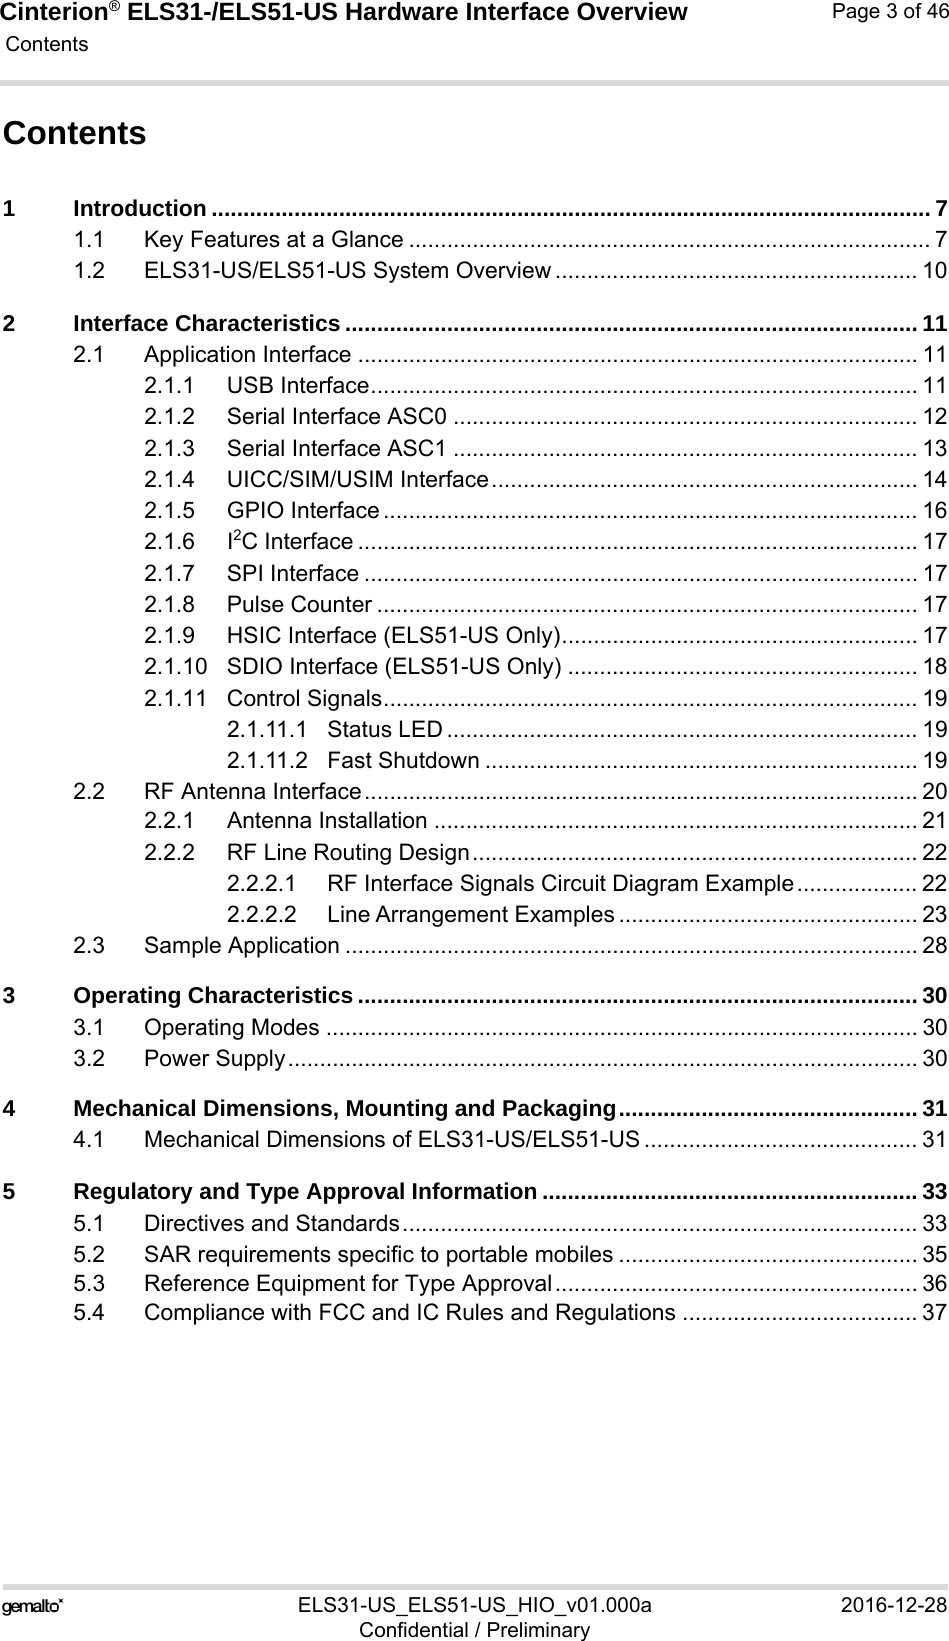 Cinterion® ELS31-/ELS51-US Hardware Interface Overview Contents46ELS31-US_ELS51-US_HIO_v01.000a 2016-12-28Confidential / PreliminaryPage 3 of 46Contents1 Introduction ................................................................................................................. 71.1 Key Features at a Glance .................................................................................. 71.2 ELS31-US/ELS51-US System Overview ......................................................... 102 Interface Characteristics .......................................................................................... 112.1 Application Interface ........................................................................................ 112.1.1 USB Interface...................................................................................... 112.1.2 Serial Interface ASC0 ......................................................................... 122.1.3 Serial Interface ASC1 ......................................................................... 132.1.4 UICC/SIM/USIM Interface................................................................... 142.1.5 GPIO Interface .................................................................................... 162.1.6 I2C Interface ........................................................................................ 172.1.7 SPI Interface ....................................................................................... 172.1.8 Pulse Counter ..................................................................................... 172.1.9 HSIC Interface (ELS51-US Only)........................................................ 172.1.10 SDIO Interface (ELS51-US Only) ....................................................... 182.1.11 Control Signals.................................................................................... 192.1.11.1 Status LED .......................................................................... 192.1.11.2 Fast Shutdown .................................................................... 192.2 RF Antenna Interface....................................................................................... 202.2.1 Antenna Installation ............................................................................ 212.2.2 RF Line Routing Design...................................................................... 222.2.2.1 RF Interface Signals Circuit Diagram Example................... 222.2.2.2 Line Arrangement Examples ............................................... 232.3 Sample Application .......................................................................................... 283 Operating Characteristics ........................................................................................ 303.1 Operating Modes ............................................................................................. 303.2 Power Supply................................................................................................... 304 Mechanical Dimensions, Mounting and Packaging............................................... 314.1 Mechanical Dimensions of ELS31-US/ELS51-US ........................................... 315 Regulatory and Type Approval Information ........................................................... 335.1 Directives and Standards................................................................................. 335.2 SAR requirements specific to portable mobiles ............................................... 355.3 Reference Equipment for Type Approval......................................................... 365.4 Compliance with FCC and IC Rules and Regulations ..................................... 37